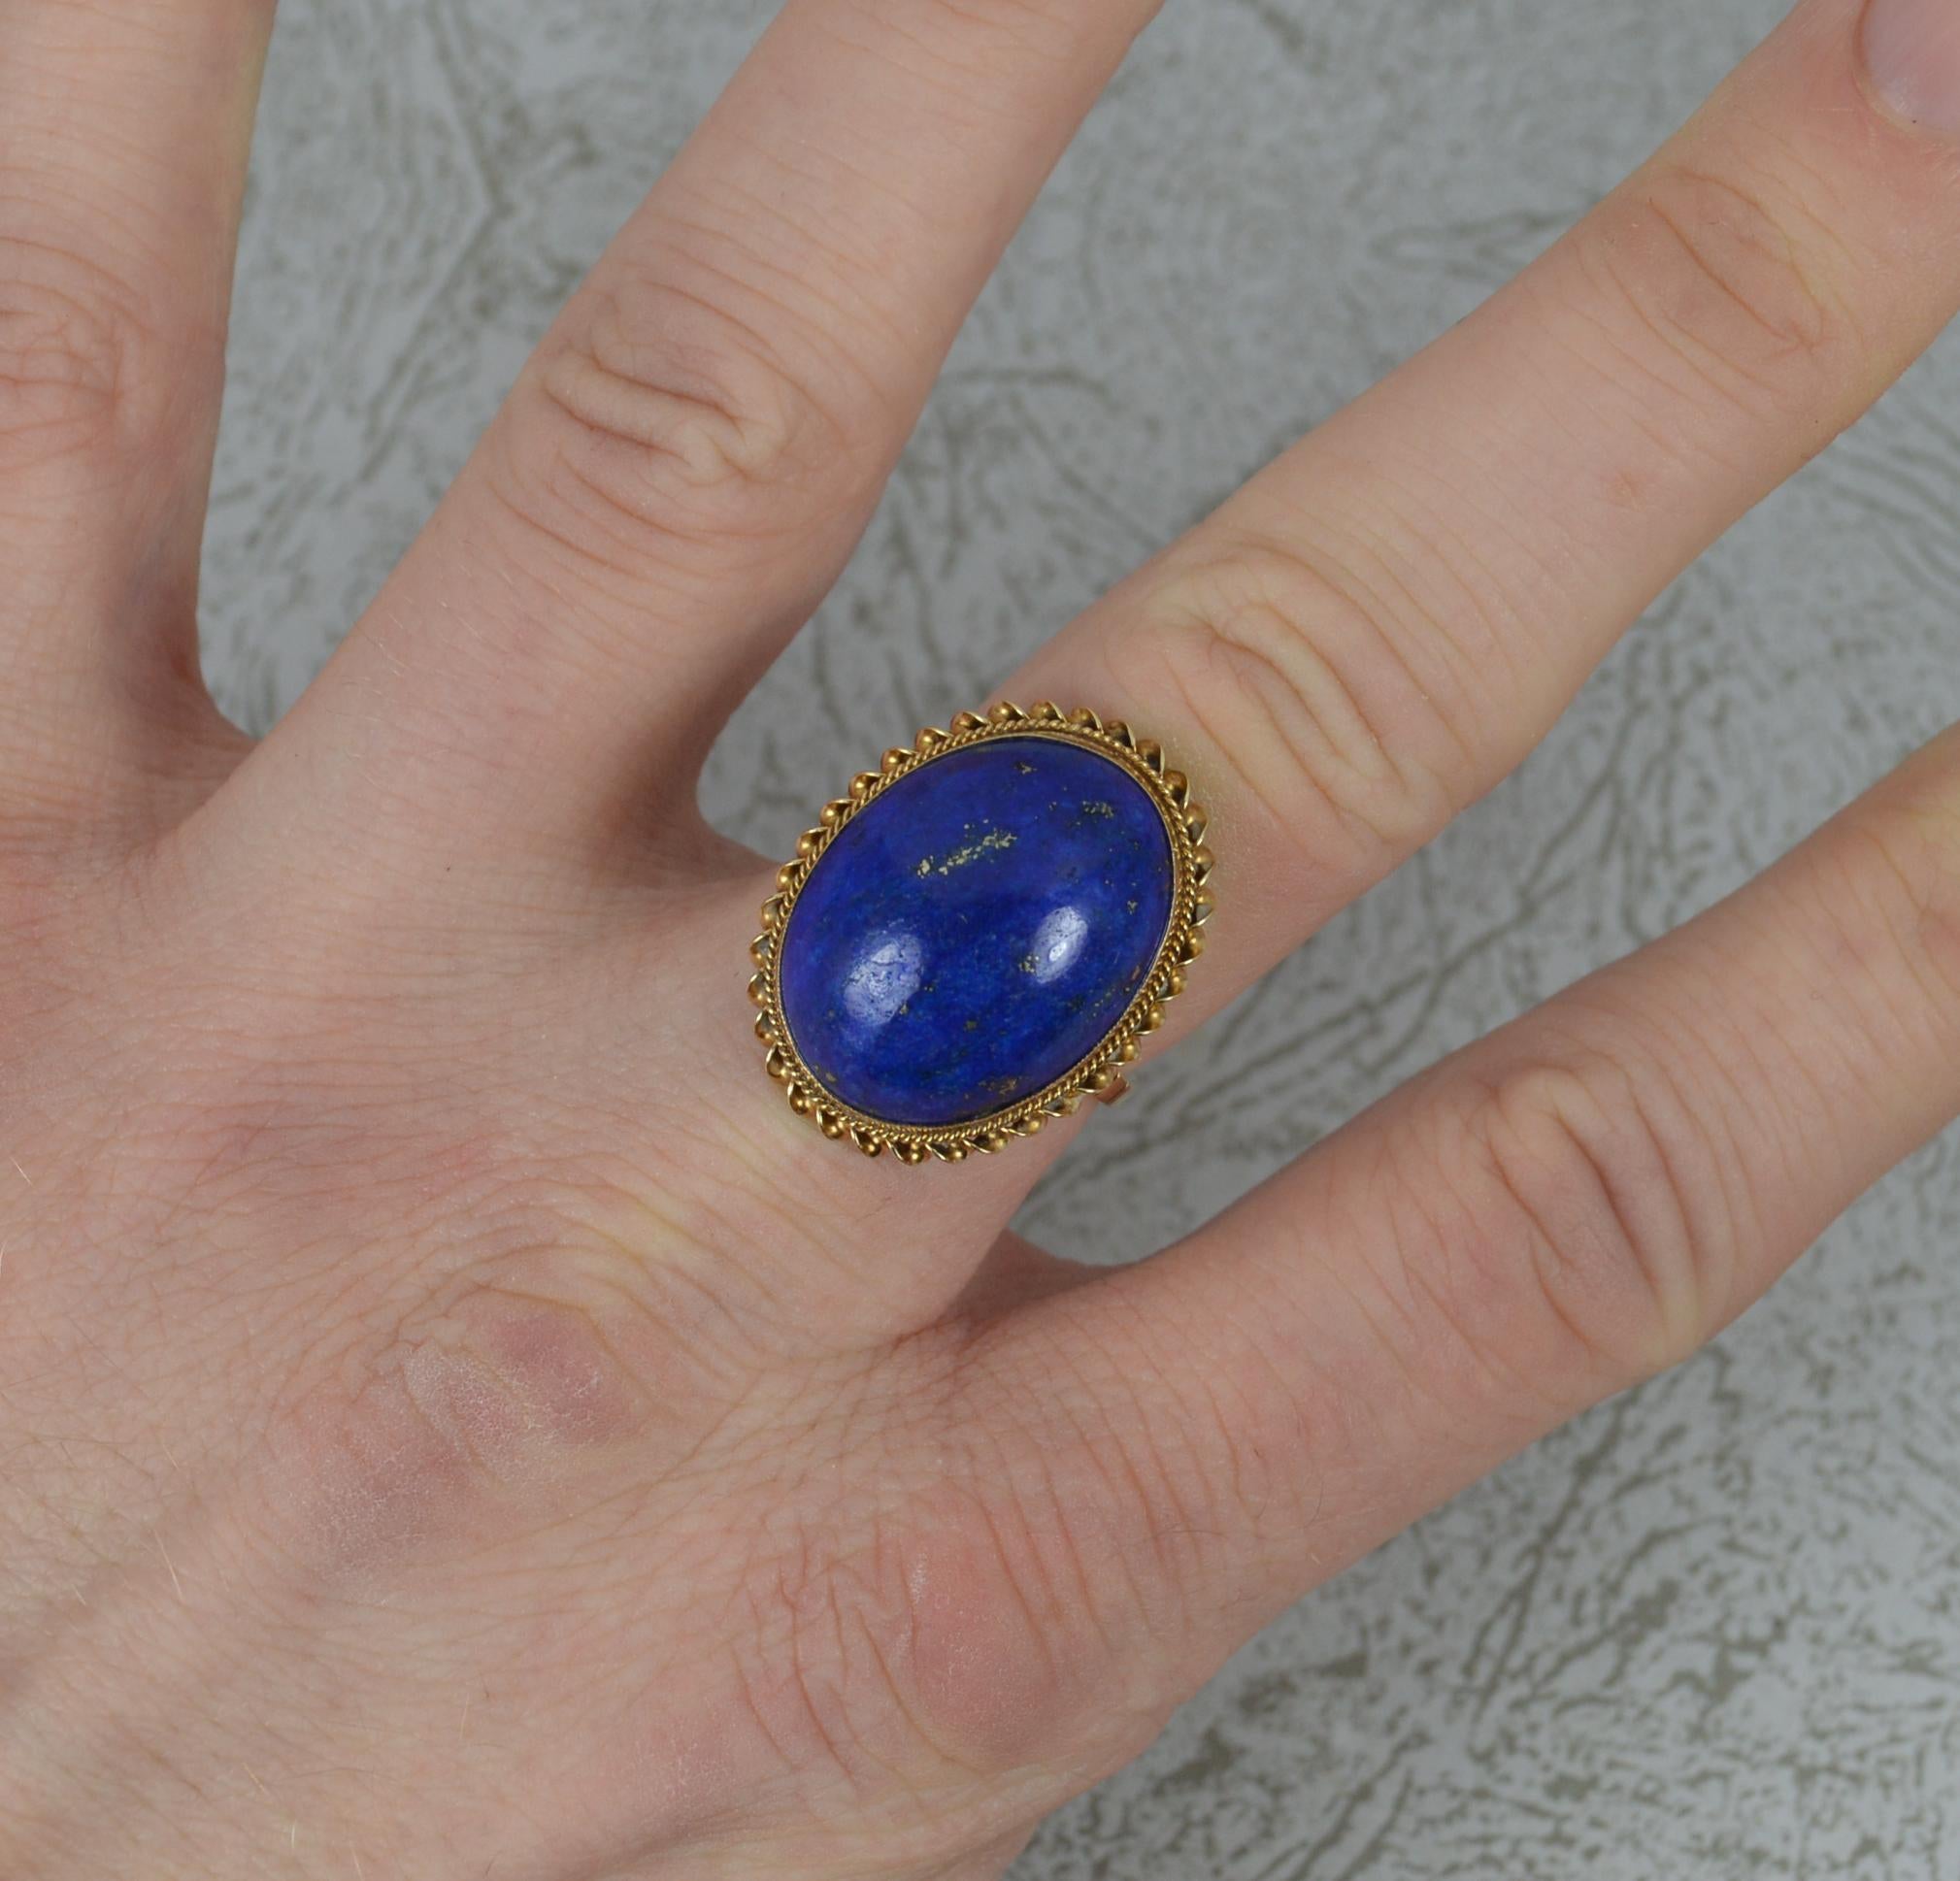 A stunning ladies solid 9 carat yellow gold and lapis lazuli ring.
Set with an oval shaped lapis lazuli, 15mm x 20mm with gold rope twist border surround.
Protruding 9mm off the finger.

Condition ; Very good. Crisp design. Solid piece. Well set